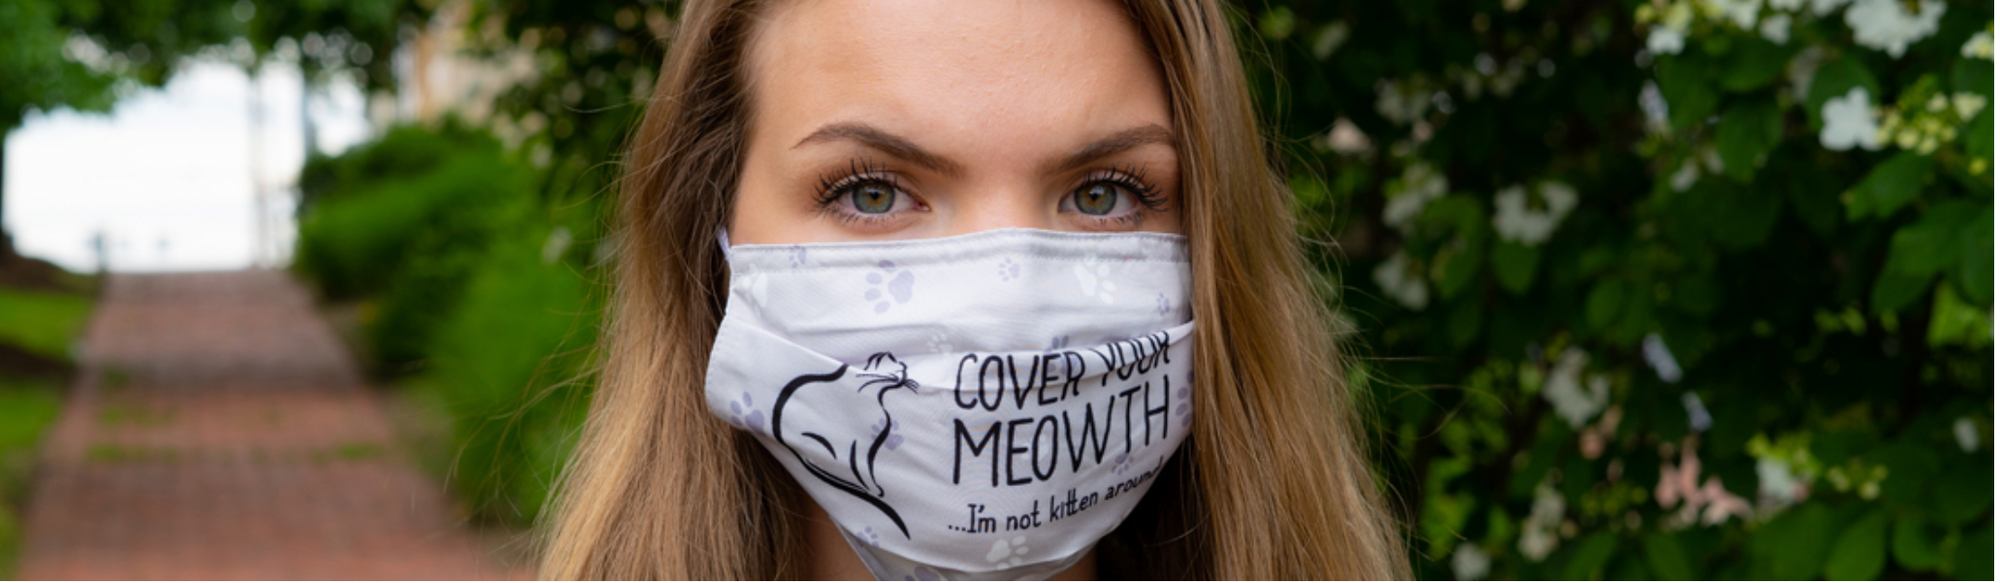 Woman wearing the Cuddle Clones "Cover Your Meowth" cat face mask.